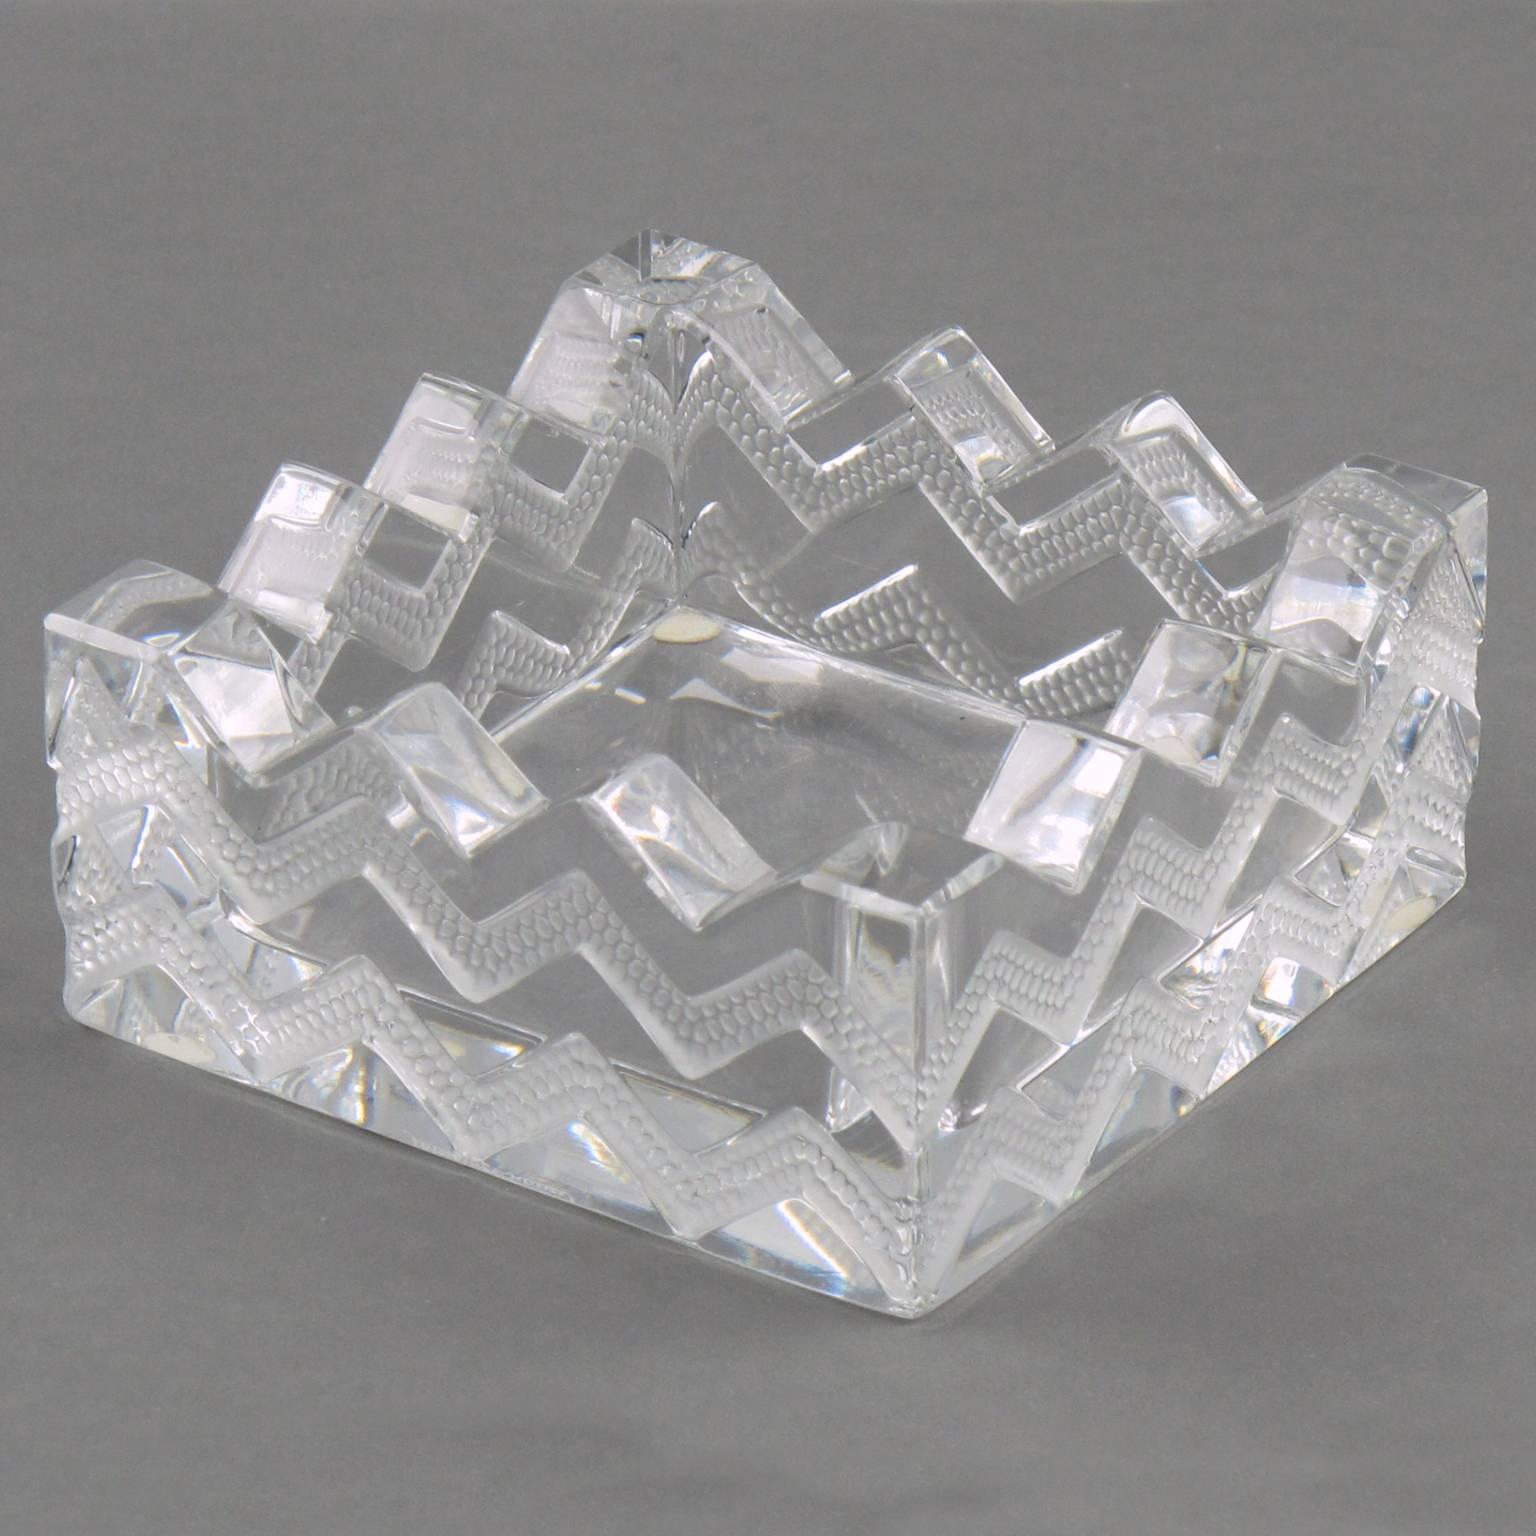 Beautiful Lalique square crystal ashtray or bowl or desk tidy with chevron pattern on the sides. Known as the 